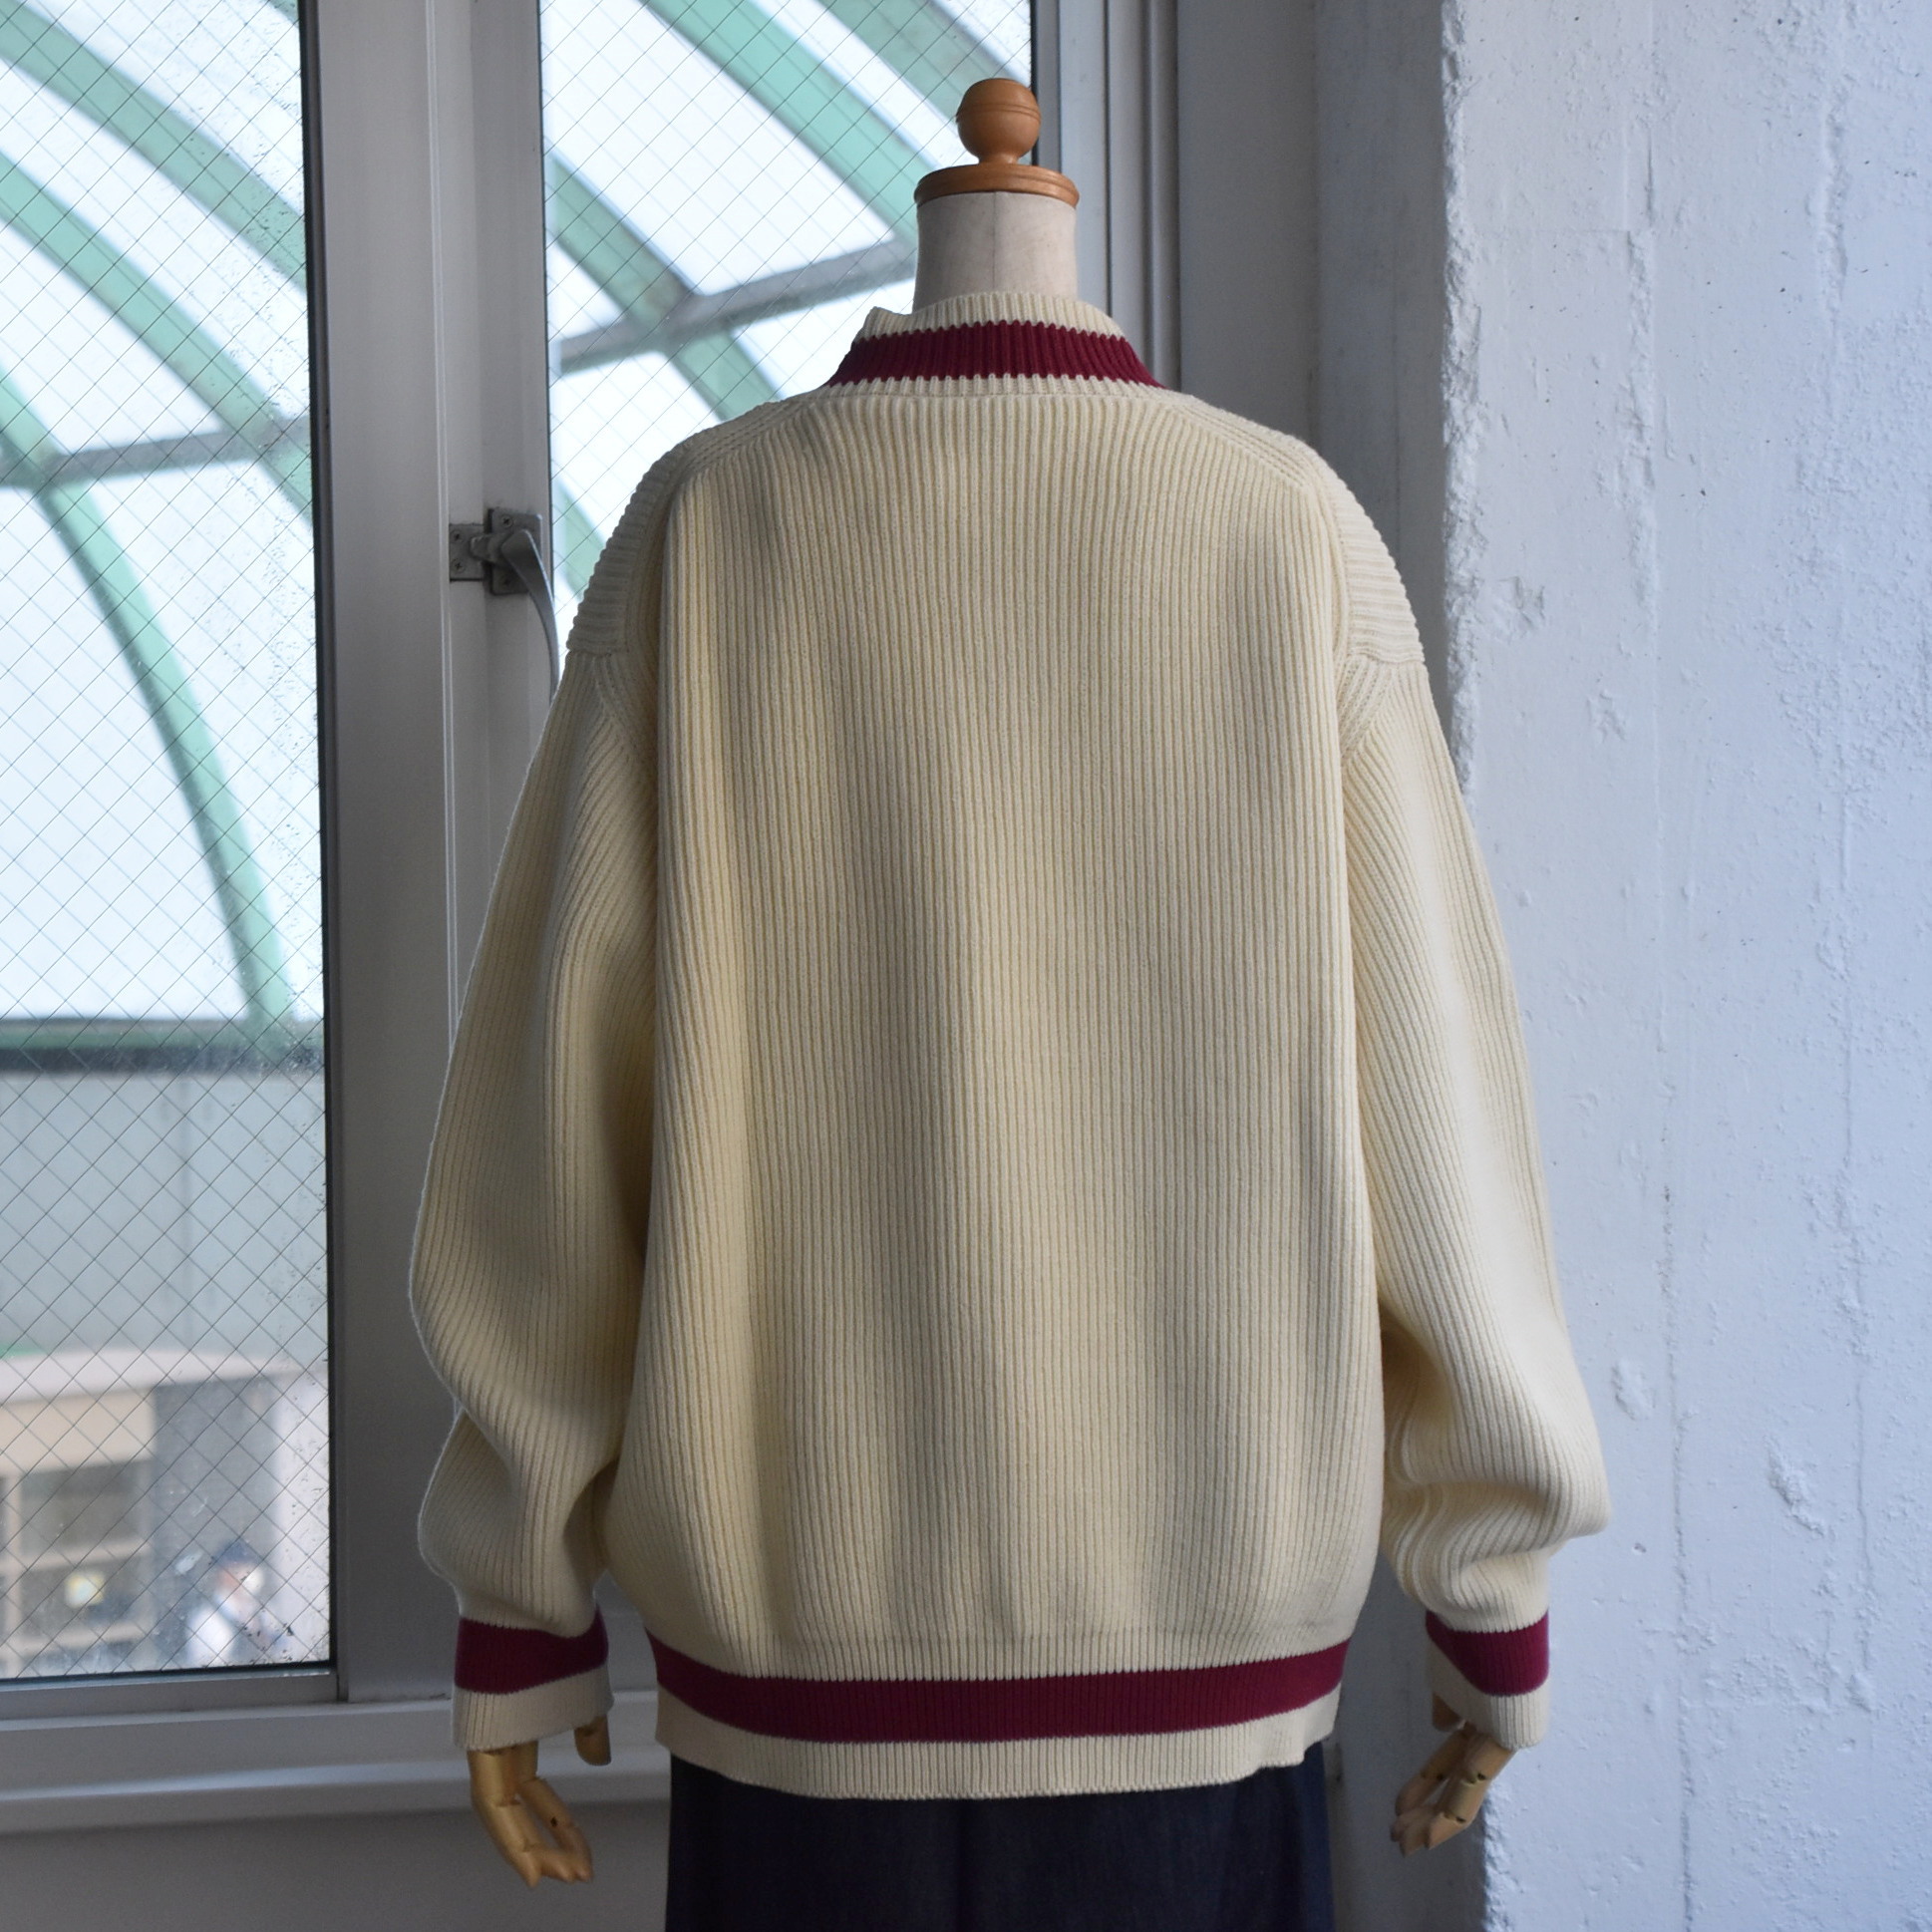 SOFIE D'HOORE(ソフィードール) / 3ply V-neck contrast color sweater【2色展開】(7)